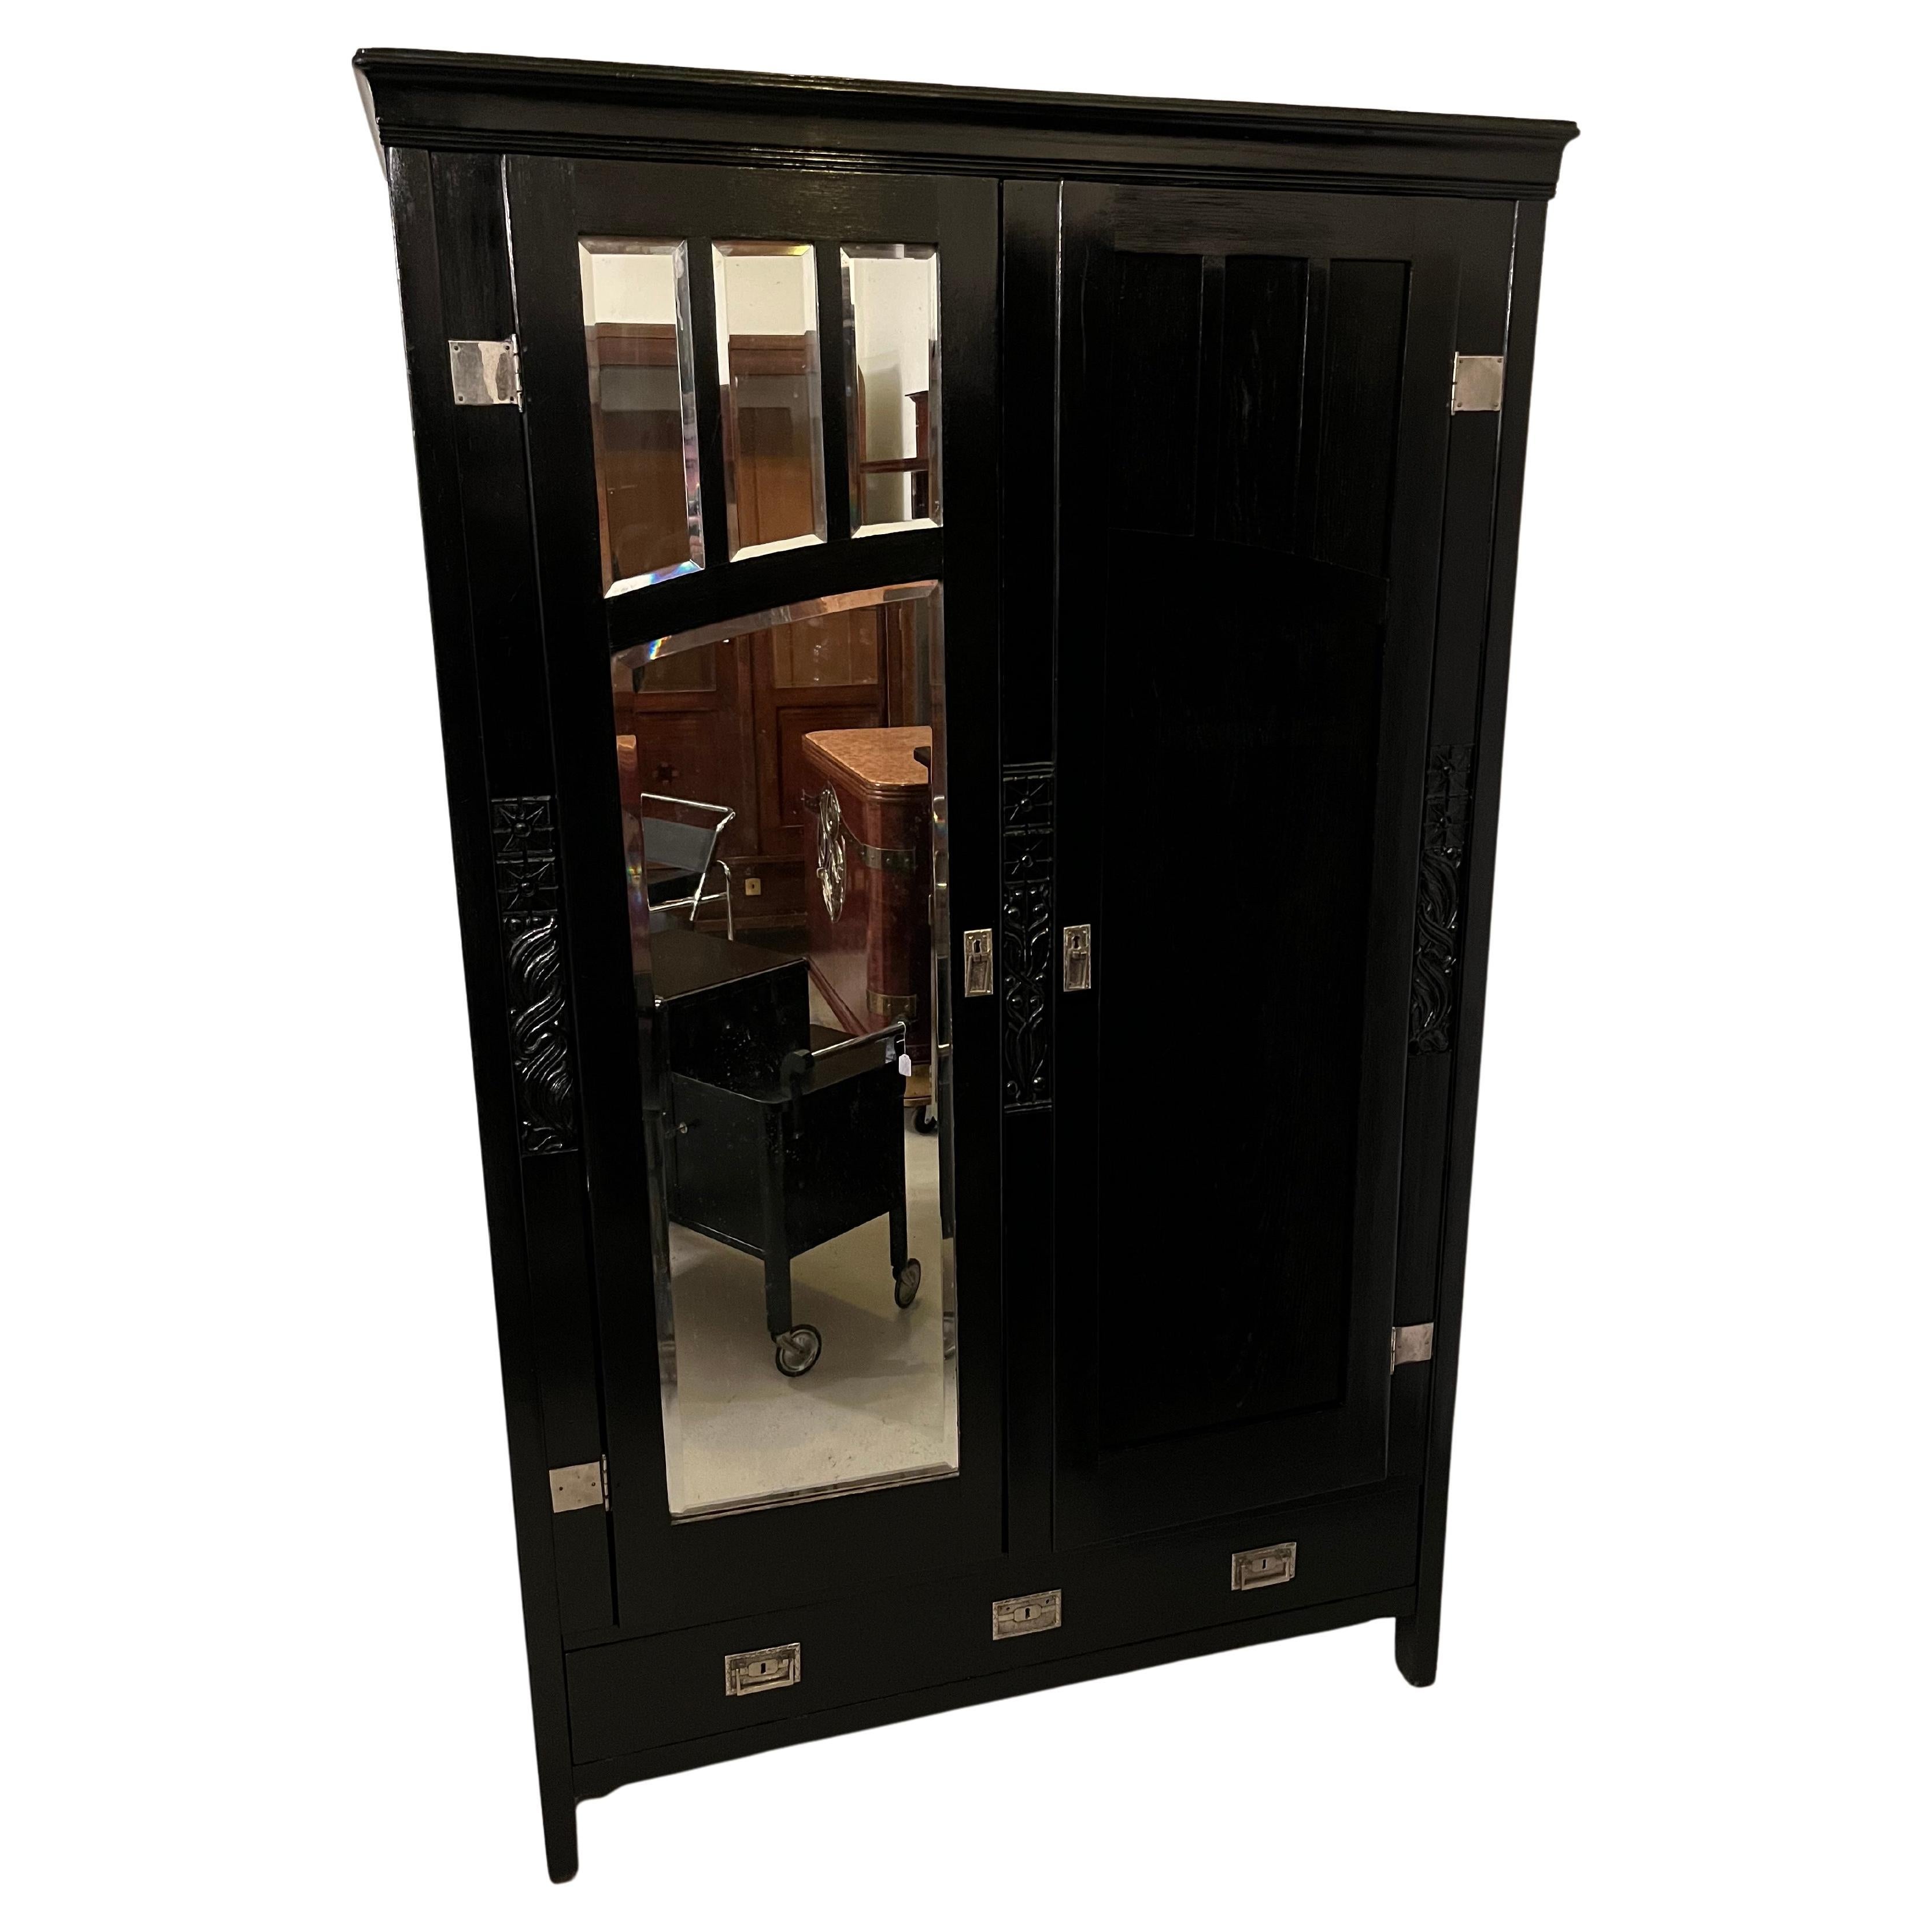 2 x Black Art Nouveau Wardrobe with floral Carvings (Vienna, circa 1905) For Sale